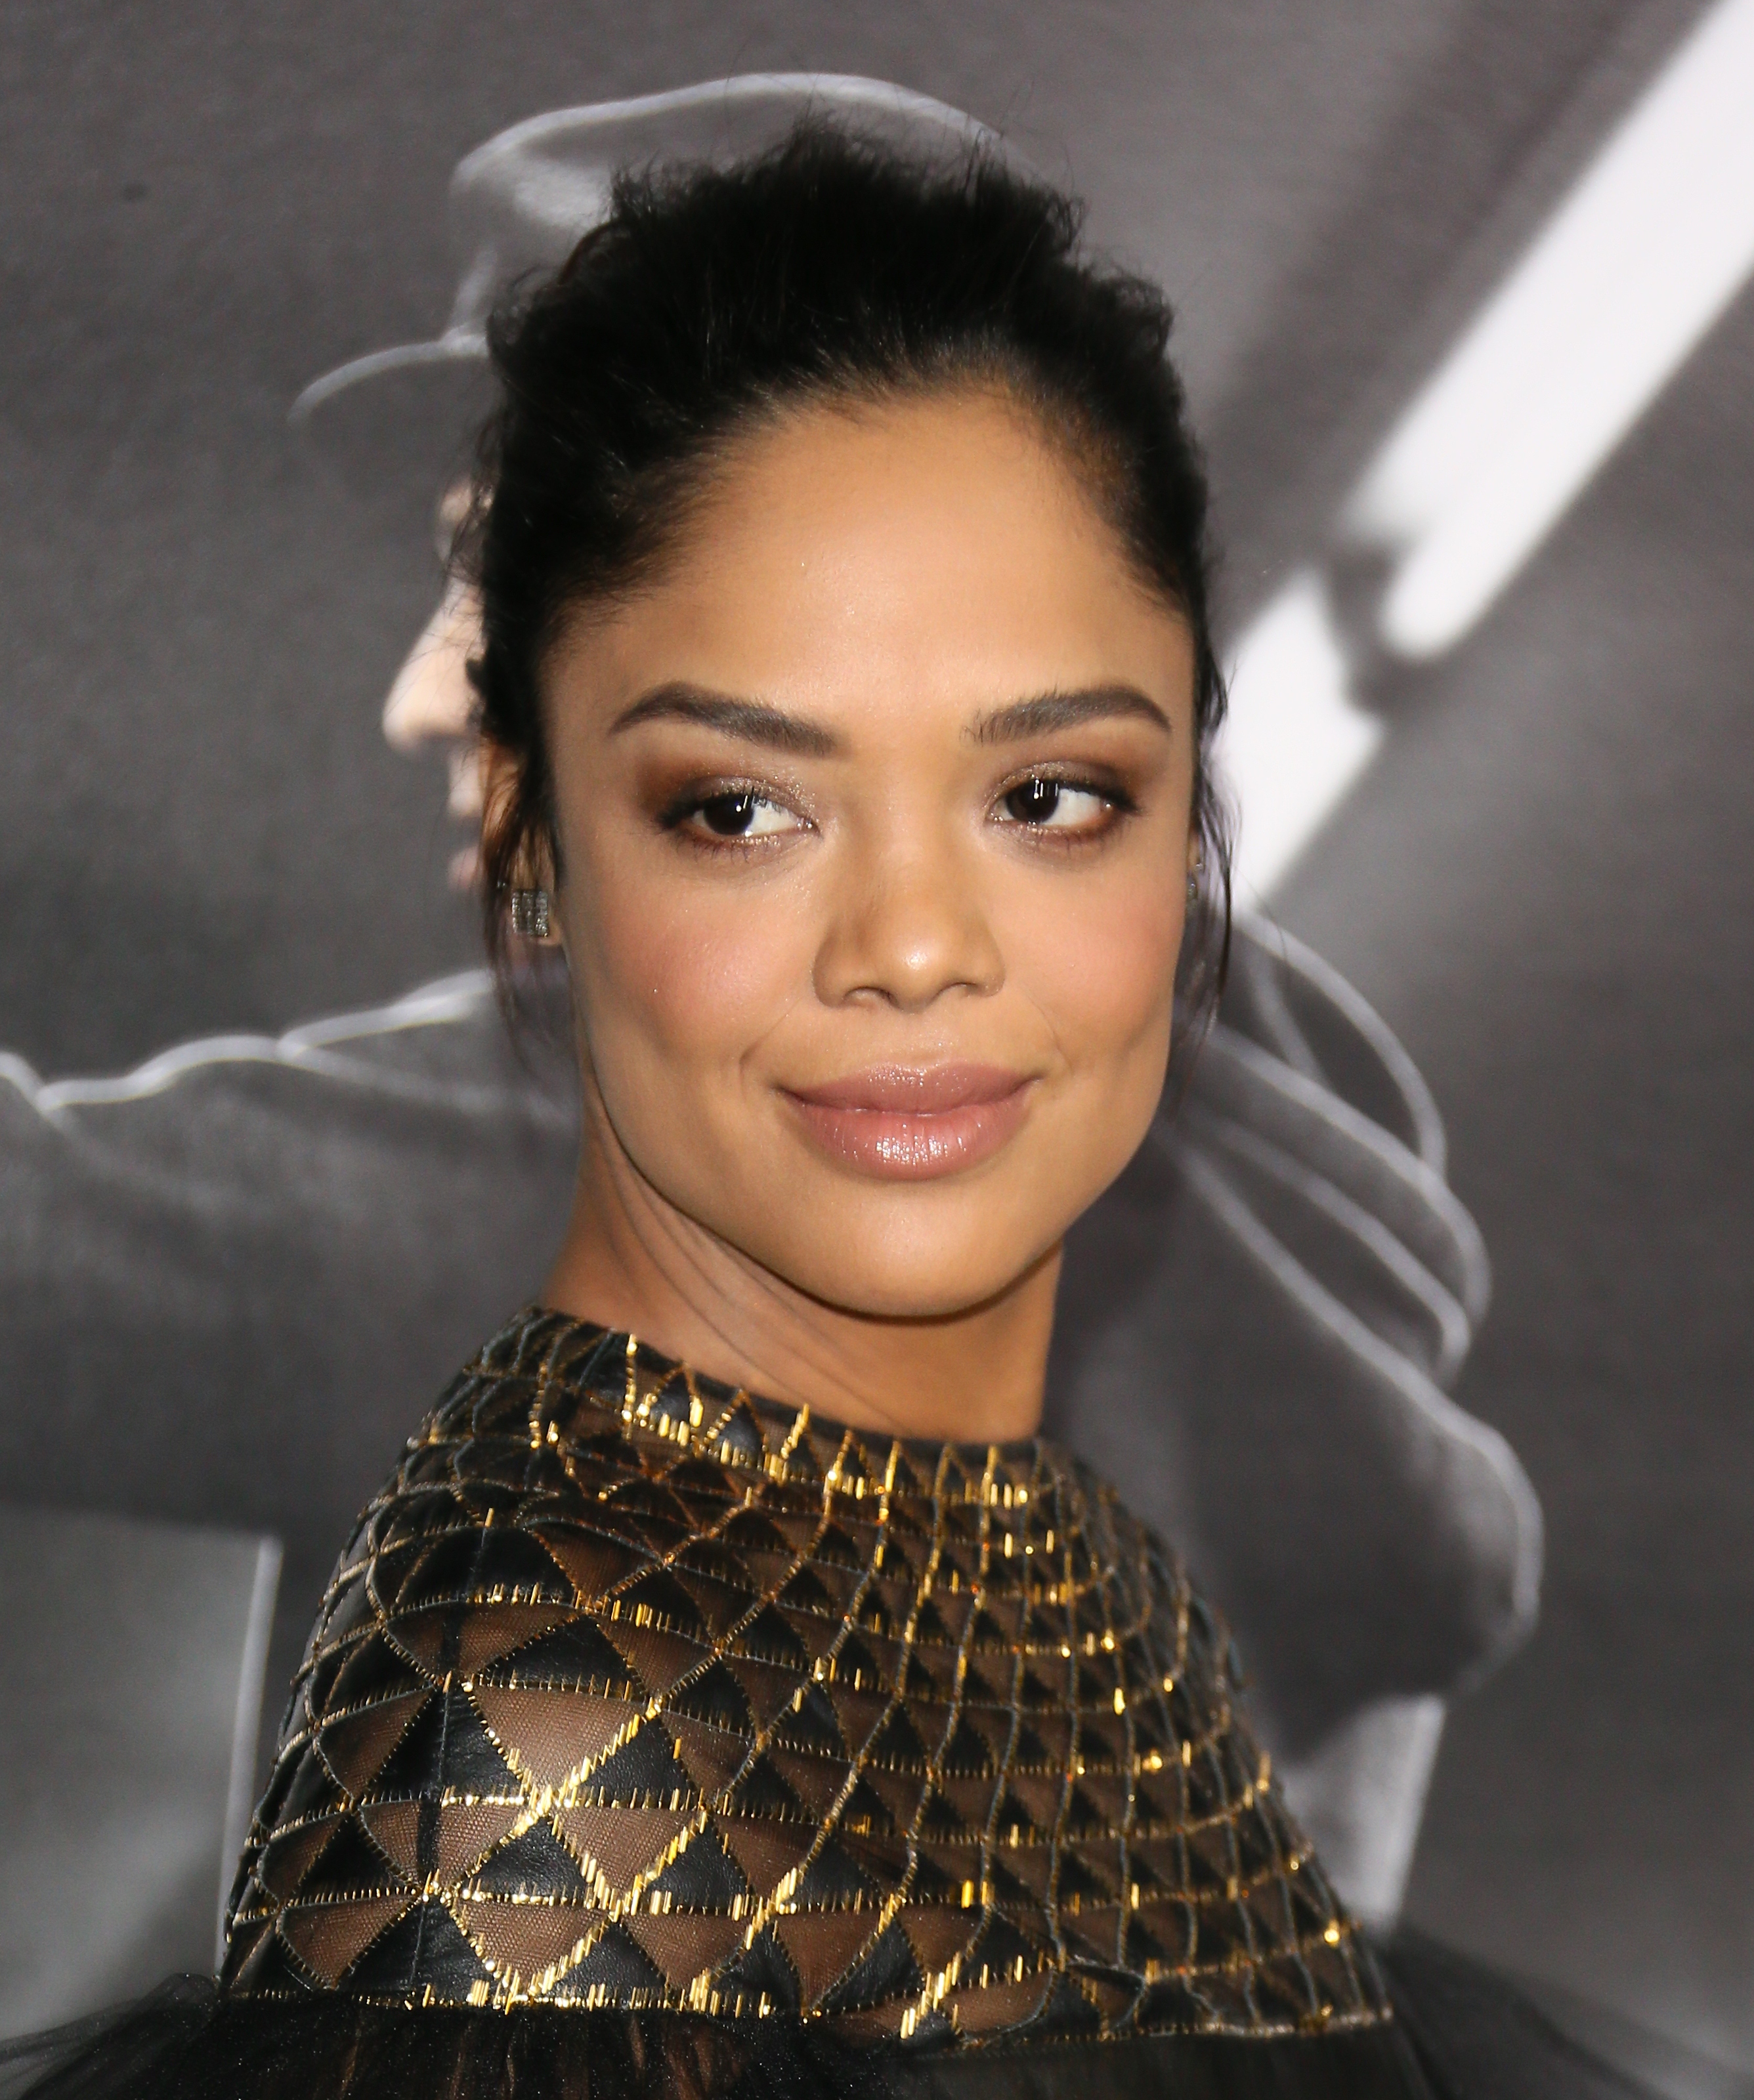 Tessa Thompson Talks About Her Role In 'Creed'